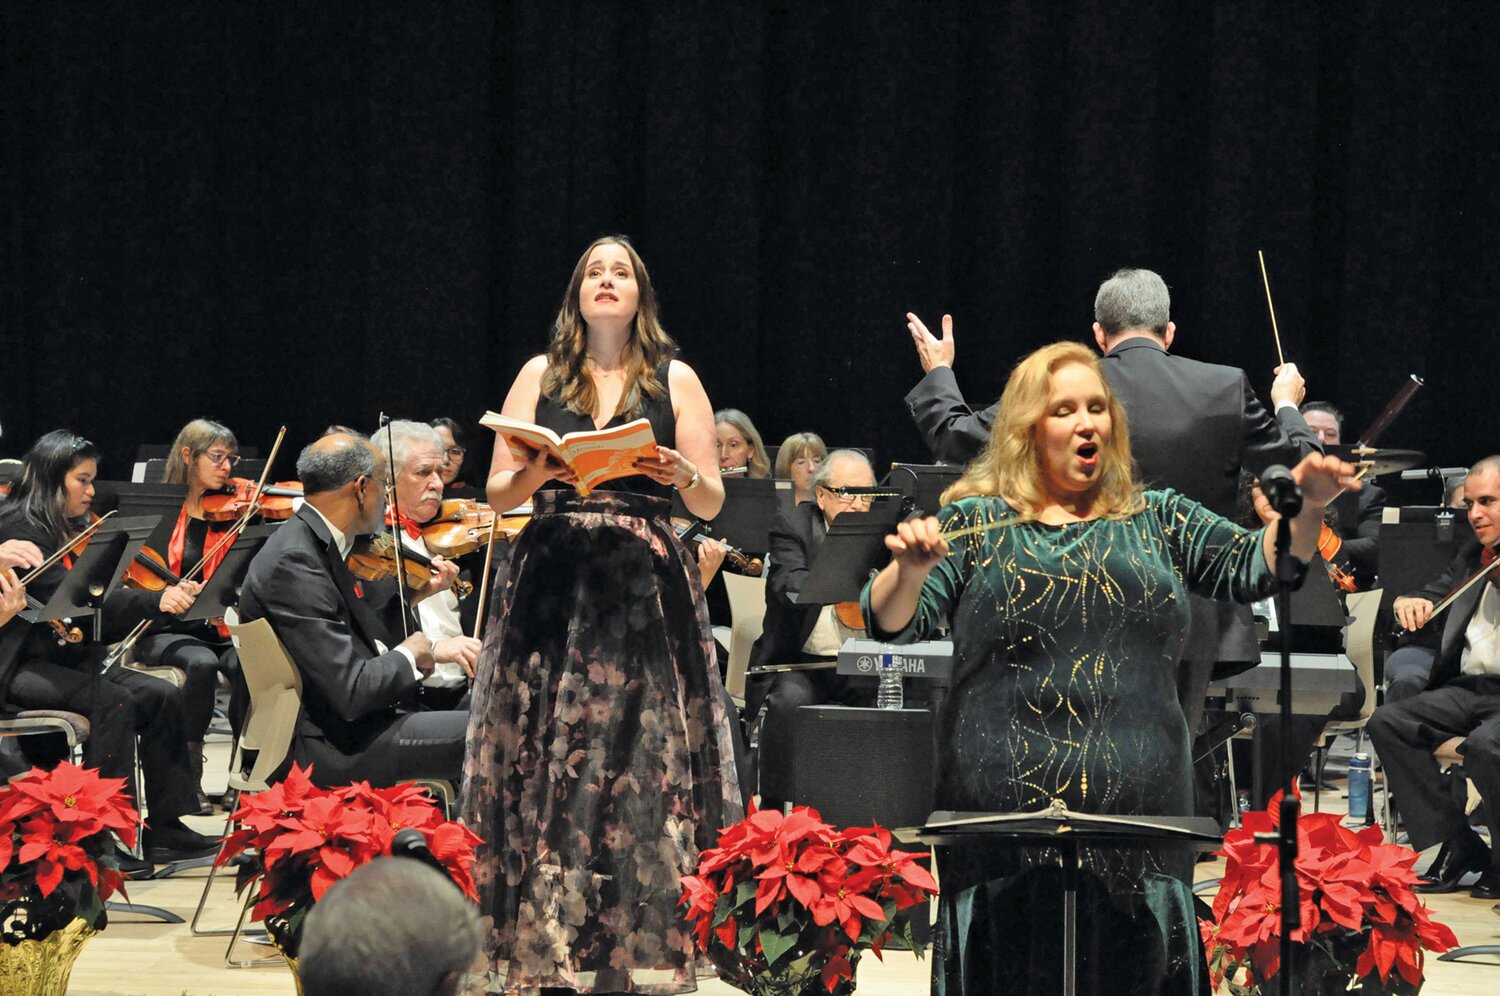 The Bucks County Gilbert & Sullivan Society brings the community together for its 10th annual “Handel’s Messiah Sing-Along” with full orchestra Dec. 16.